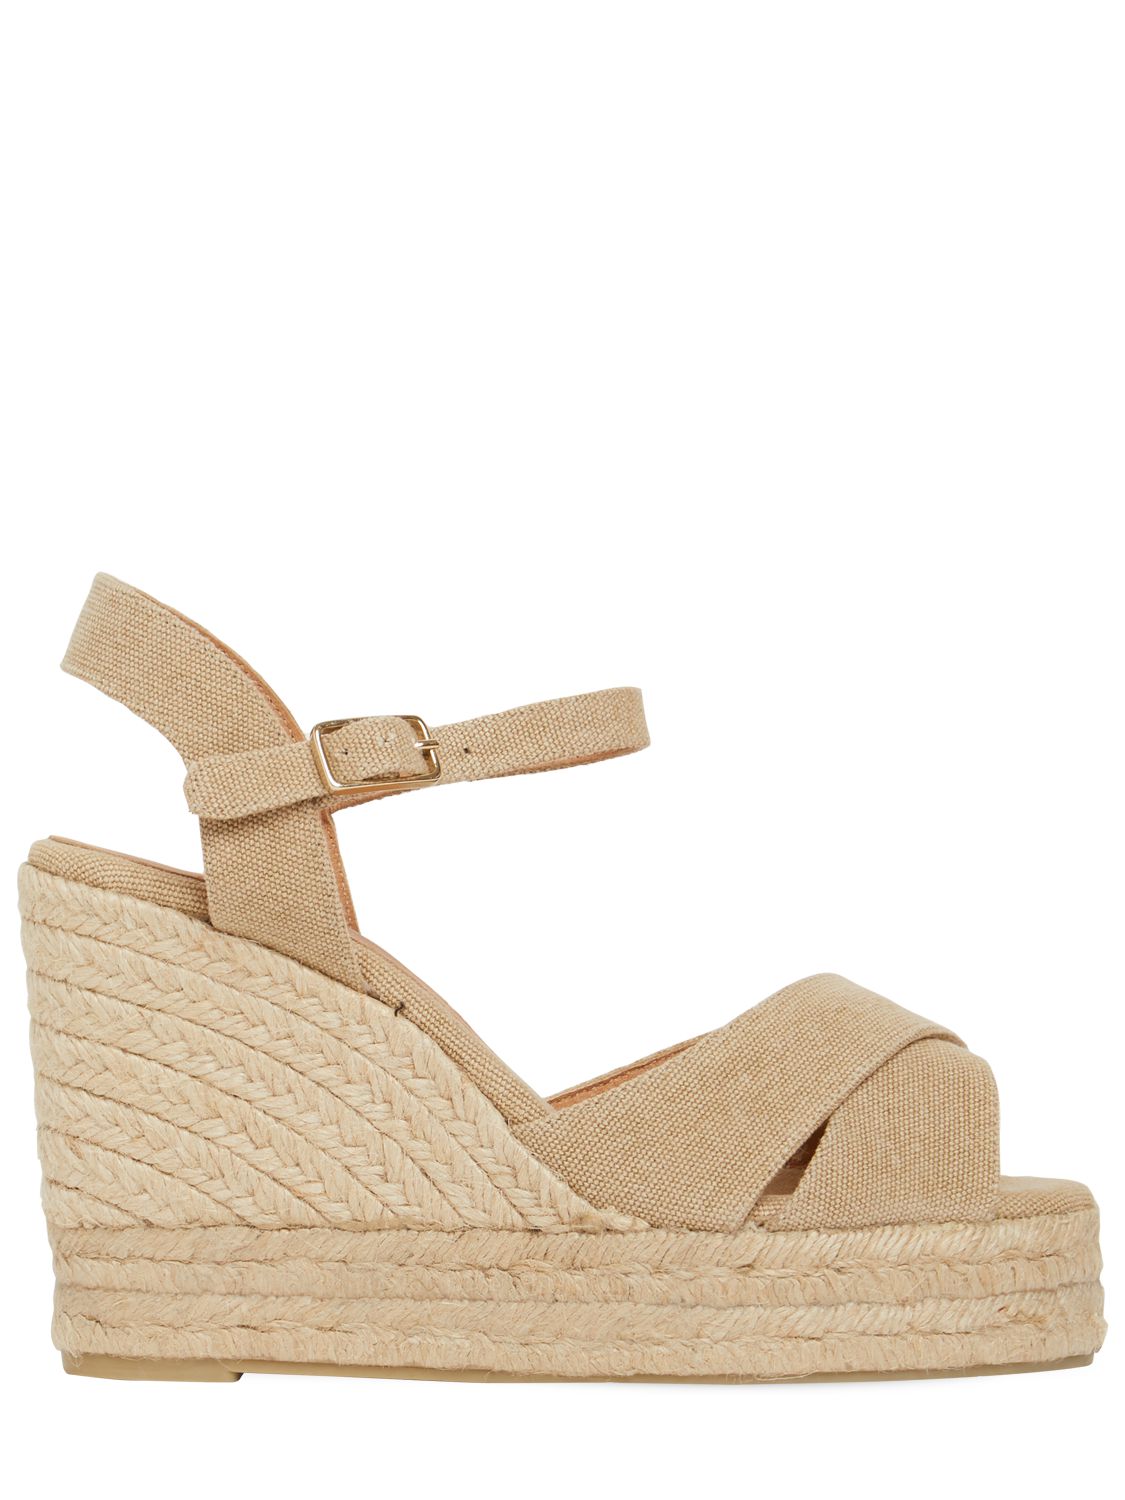 Image of 110mm Blaudell Cotton Espadrille Wedges